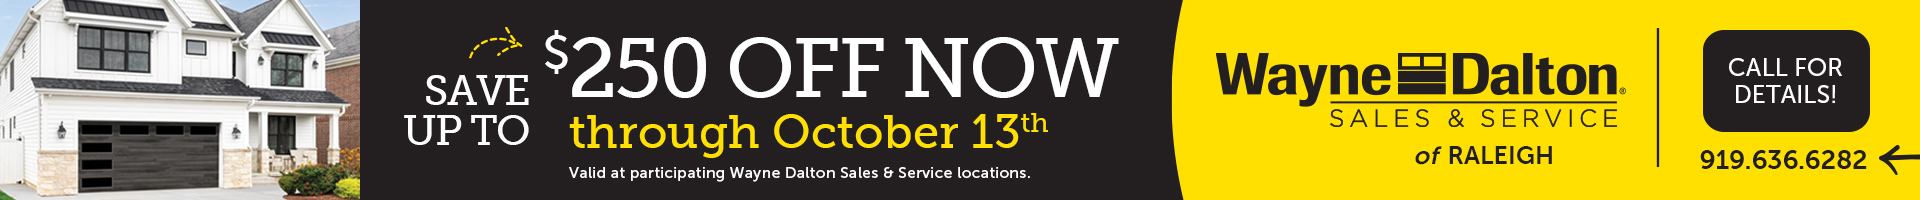 ad web banner that says save up to $250 through October 13th. Call wayne dalton sales and service raleigh for details.